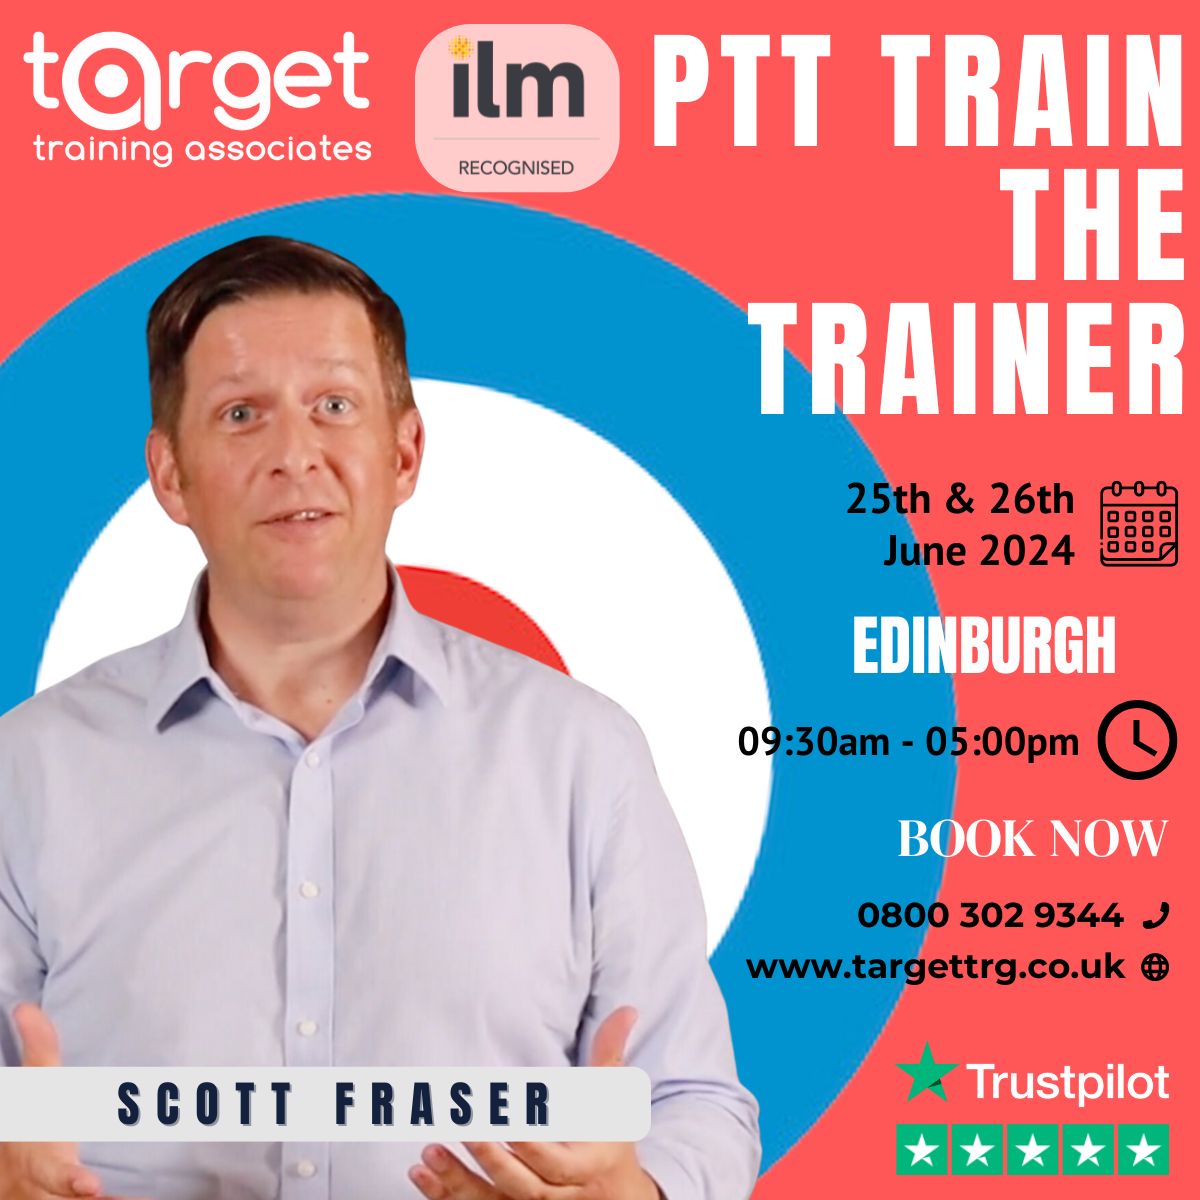 🤔 What do you think the biggest request people have on our Train the Trainer courses?
😰 There's some common themes when I ask people, 'What would you like to gain from the course?' What are they?
#TrainTheTrainer #TrainerSkills #Courses #Edinburgh #Manchester